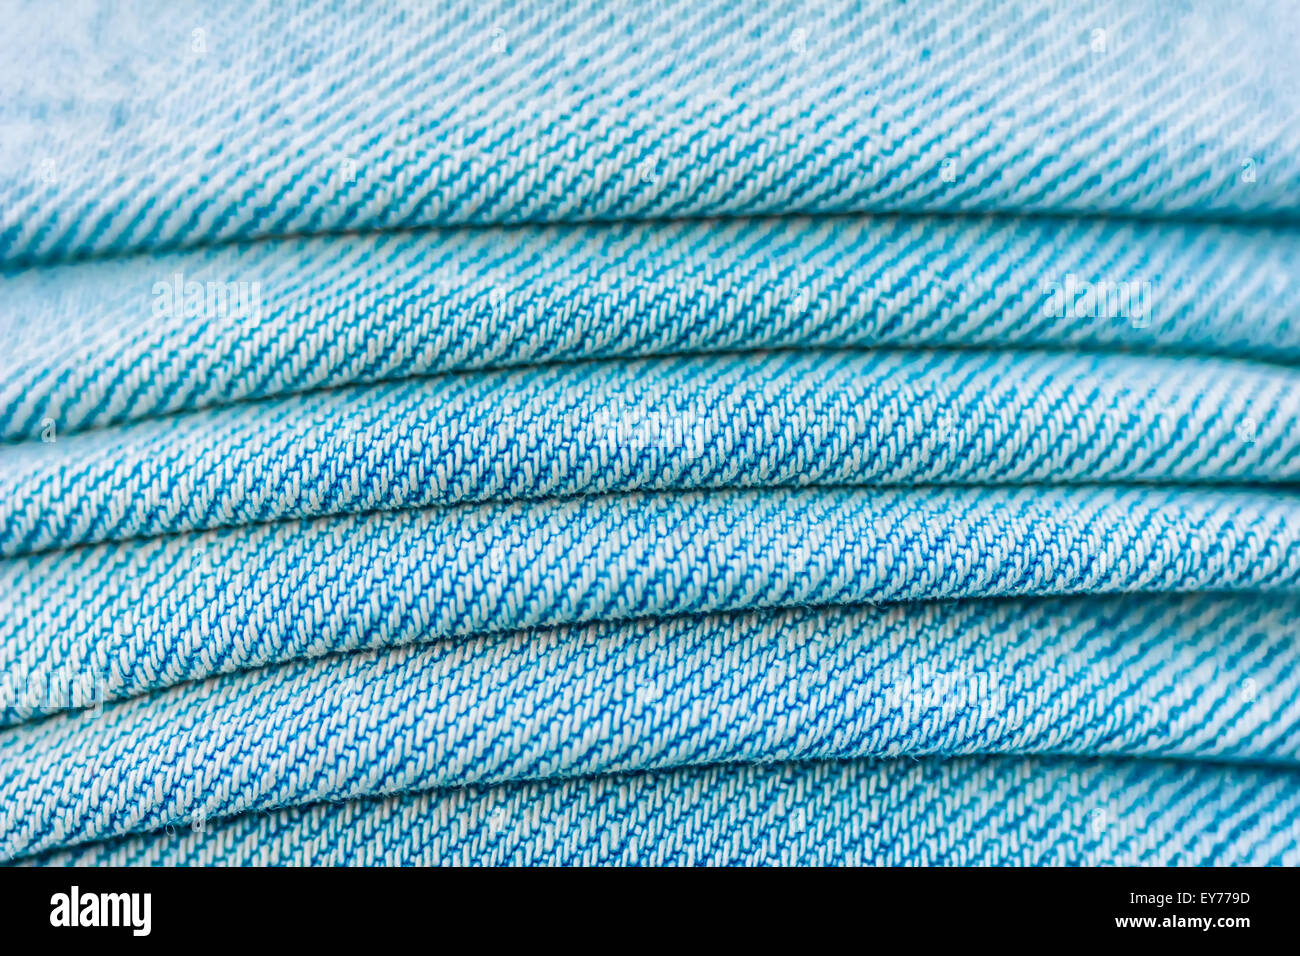 blue jeans texture. Focus in the center of the frame Stock Photo